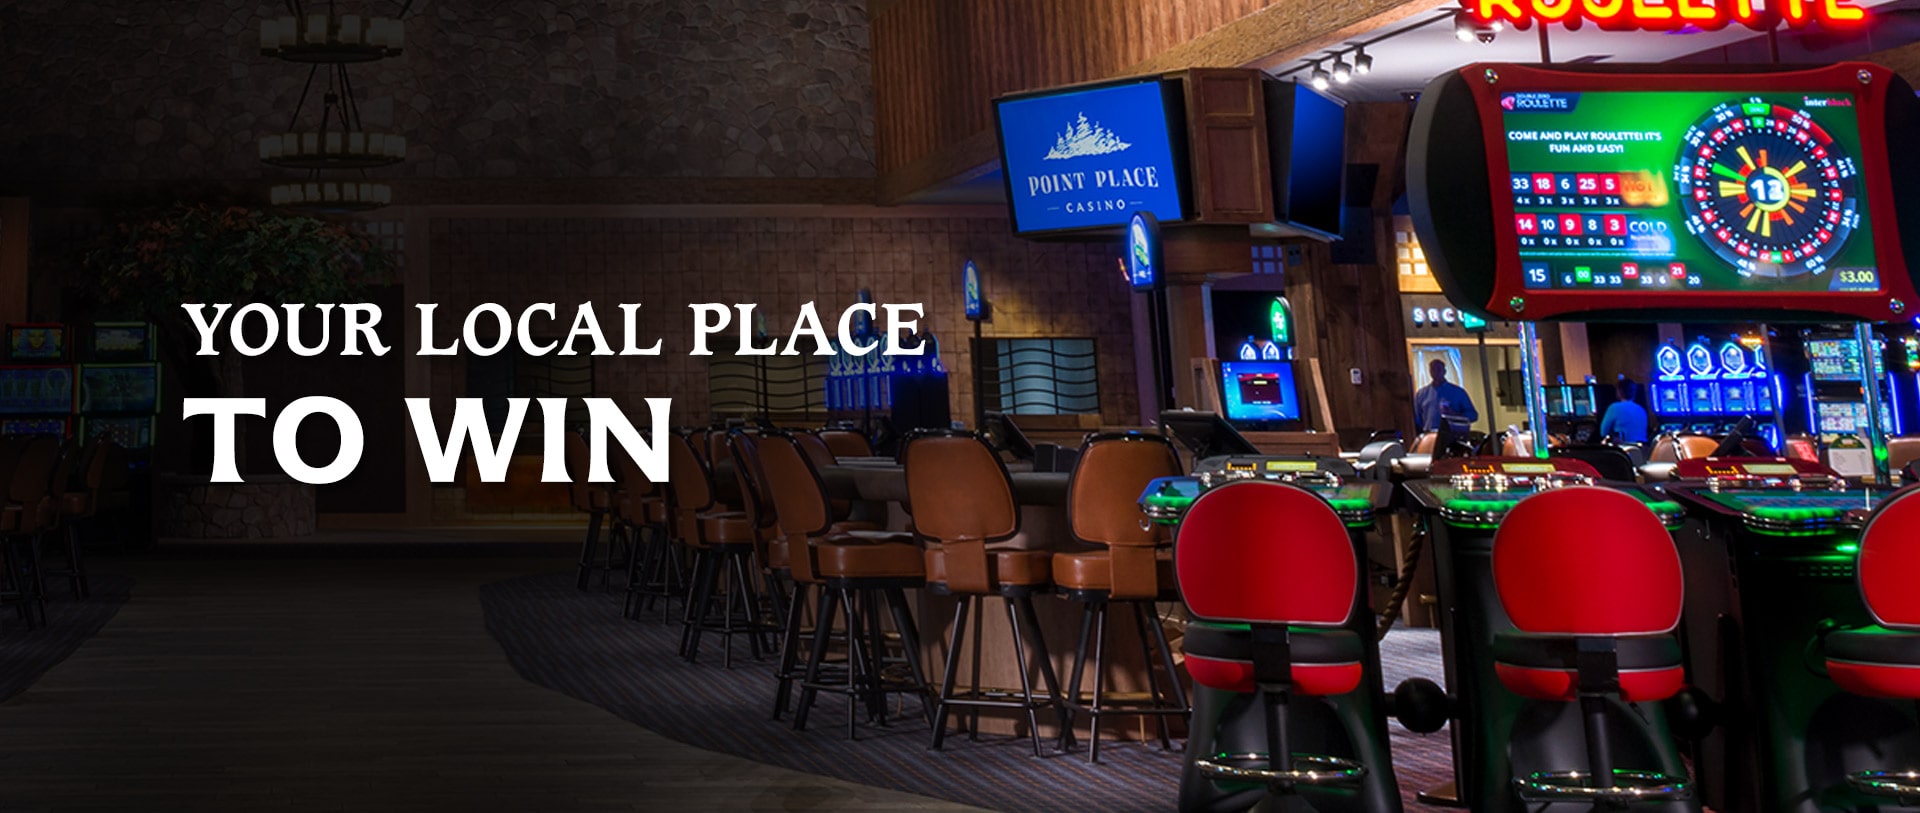 Your local place to win - point place casino